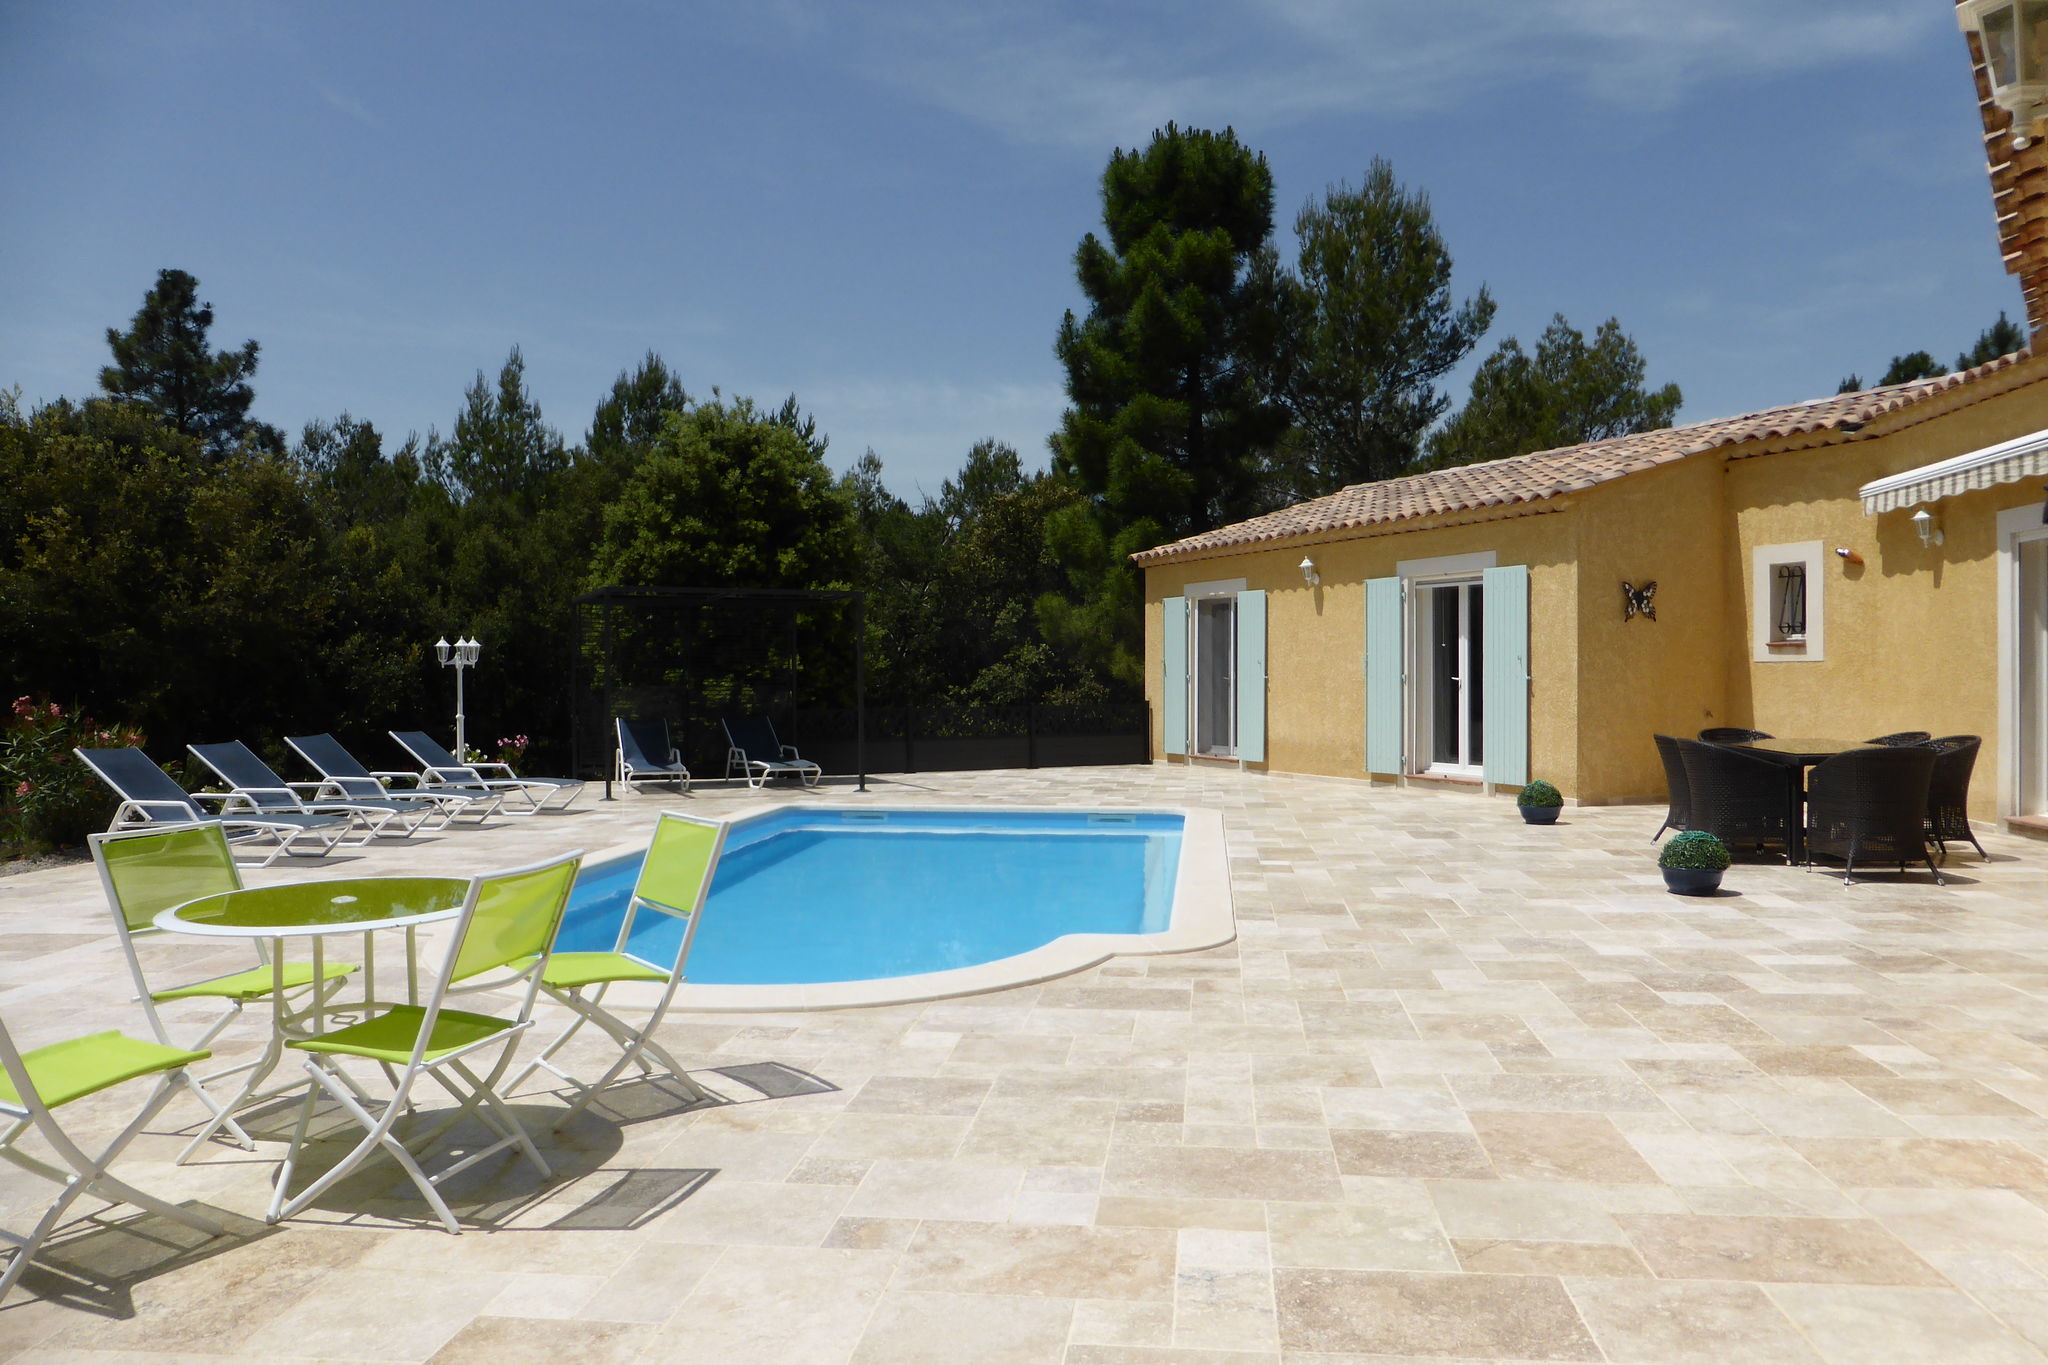 Detached spacious villa with private heated pool, near the Gorges du Verdon